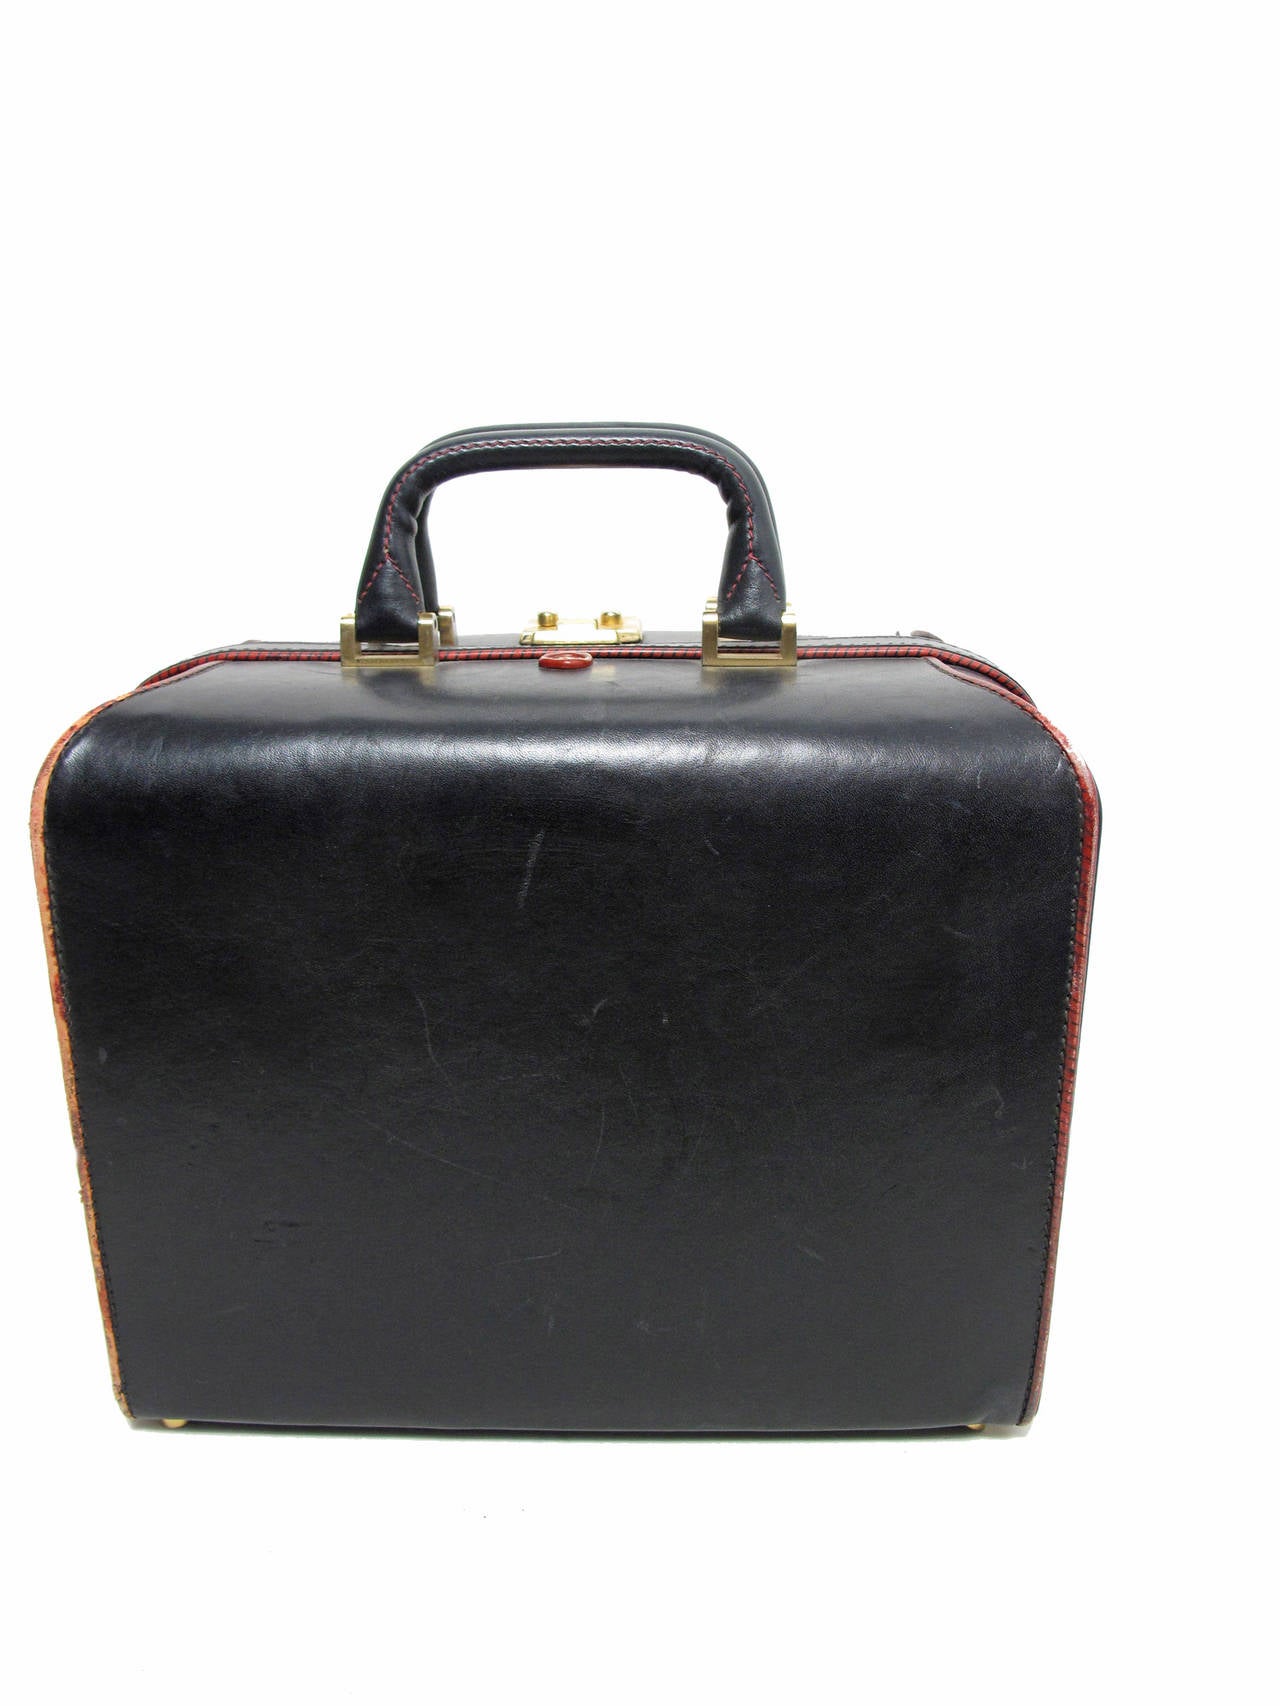 1970s black leather with red trim Valentino train case, with lock and key.  Stamped V on top to look like wax print.  Interior very good condition:  two separate compartments.  Wear to exterior, see photos. 12